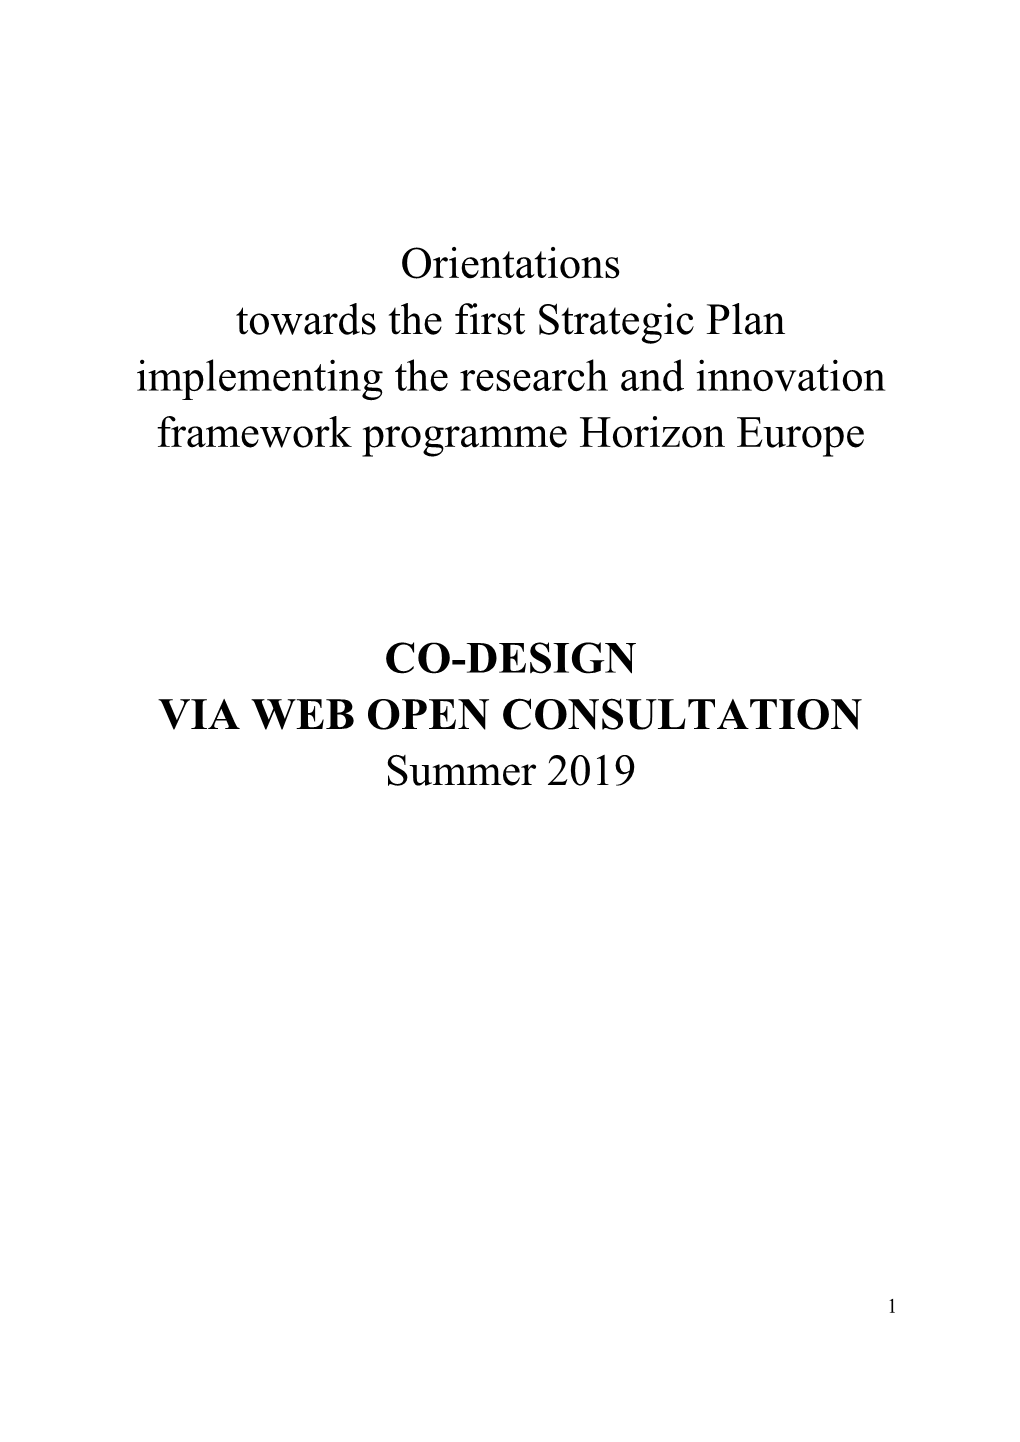 Orientations Towards the First Strategic Plan Implementing the Research and Innovation Framework Programme Horizon Europe